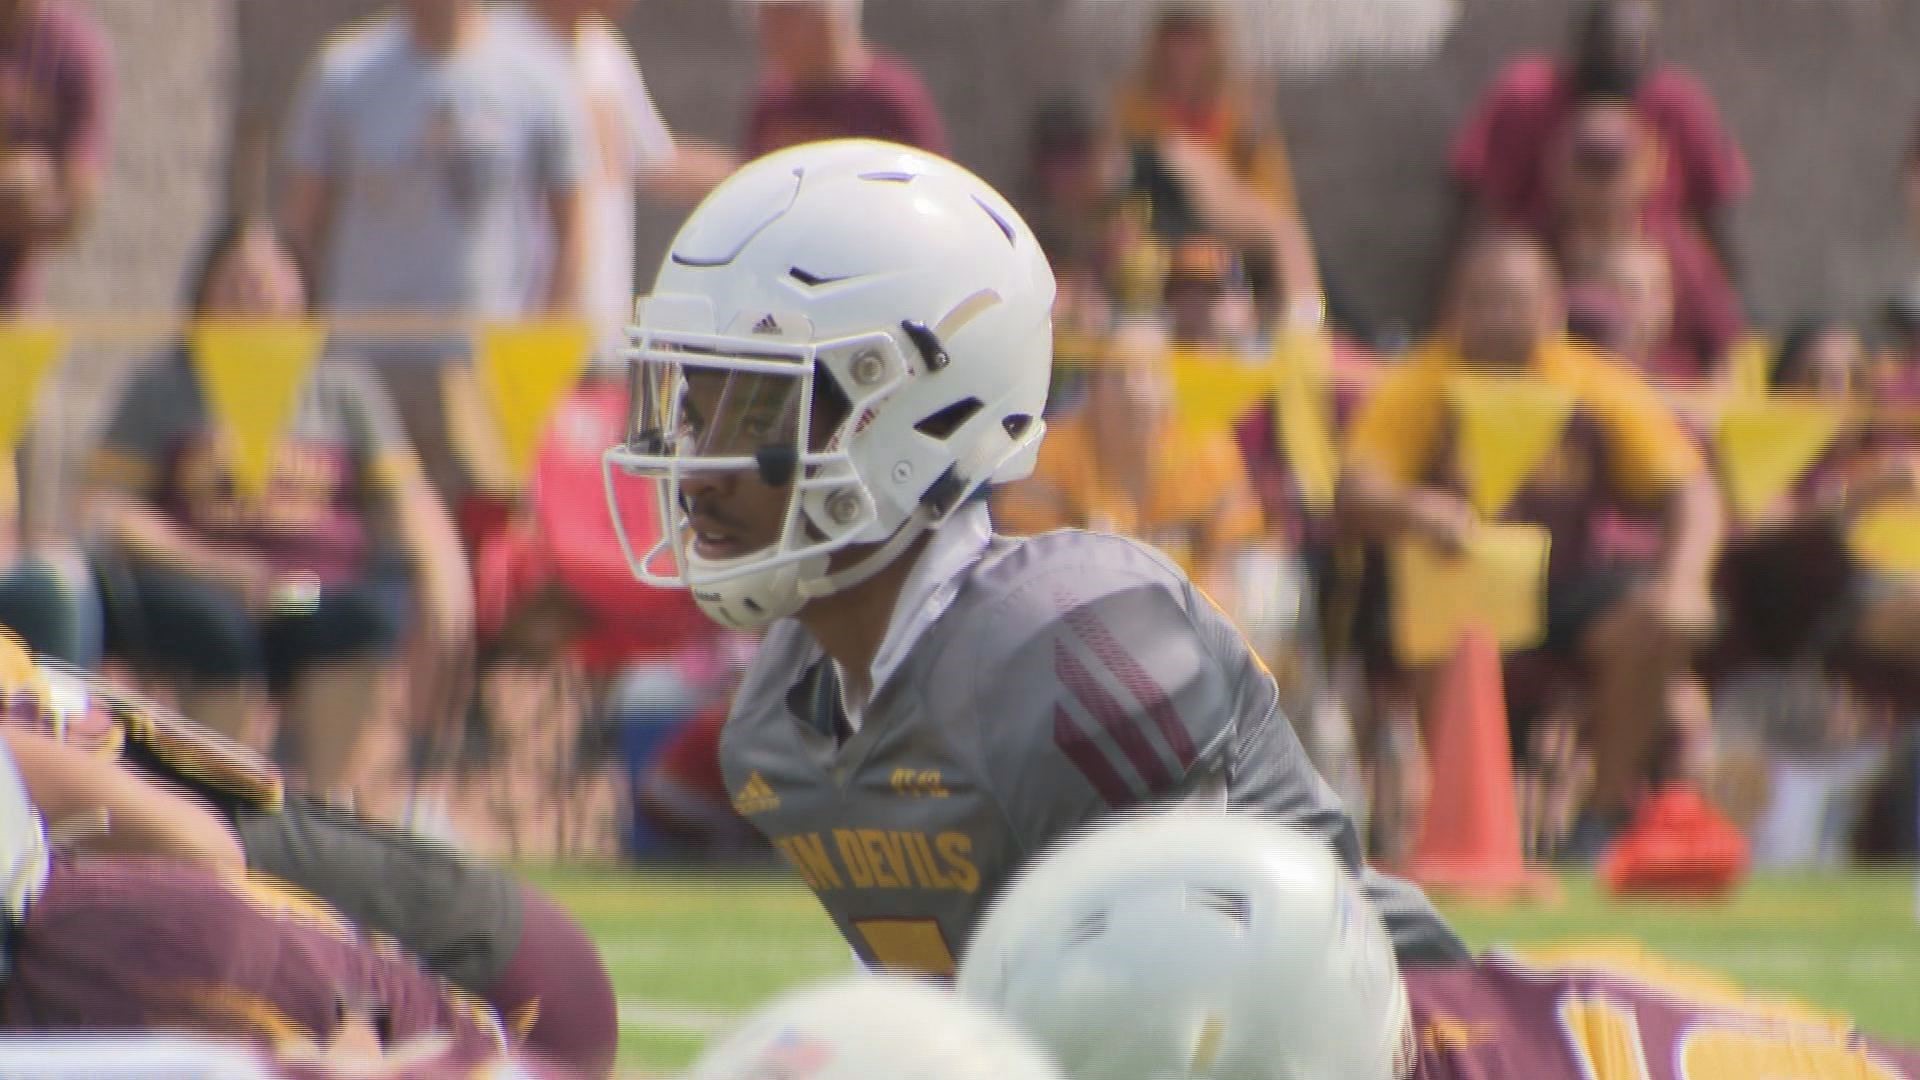 In may have been the worst kept secret in college football this season, but Herm Edwards made it official Monday night and name Jayden Daniels as the team's starting quarterback. Chierstin Susel breaks down what that means for the team and who the surprising number two is.